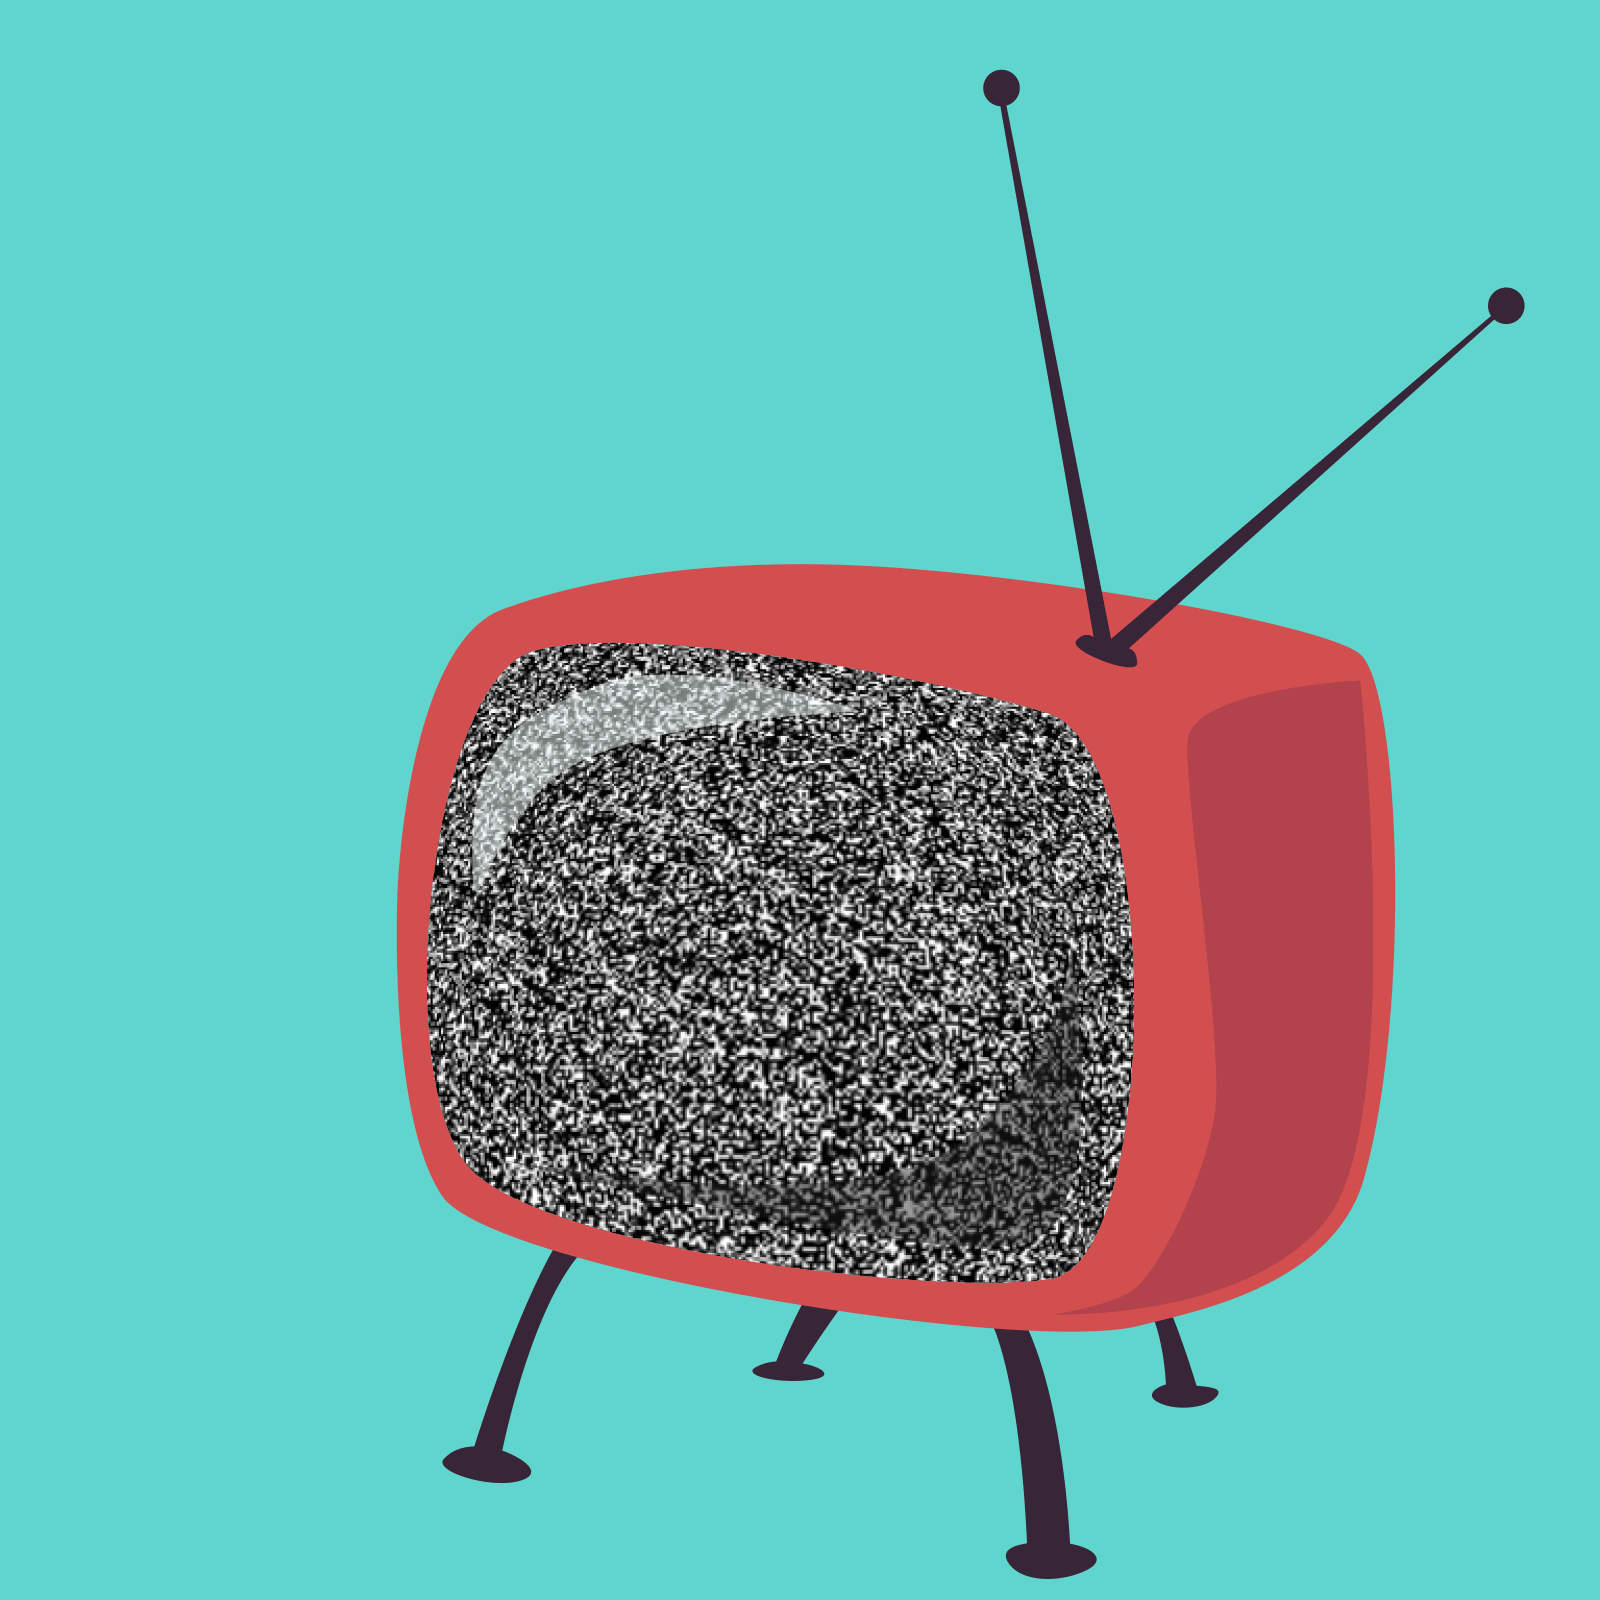 Illustration of an old TV without a picture